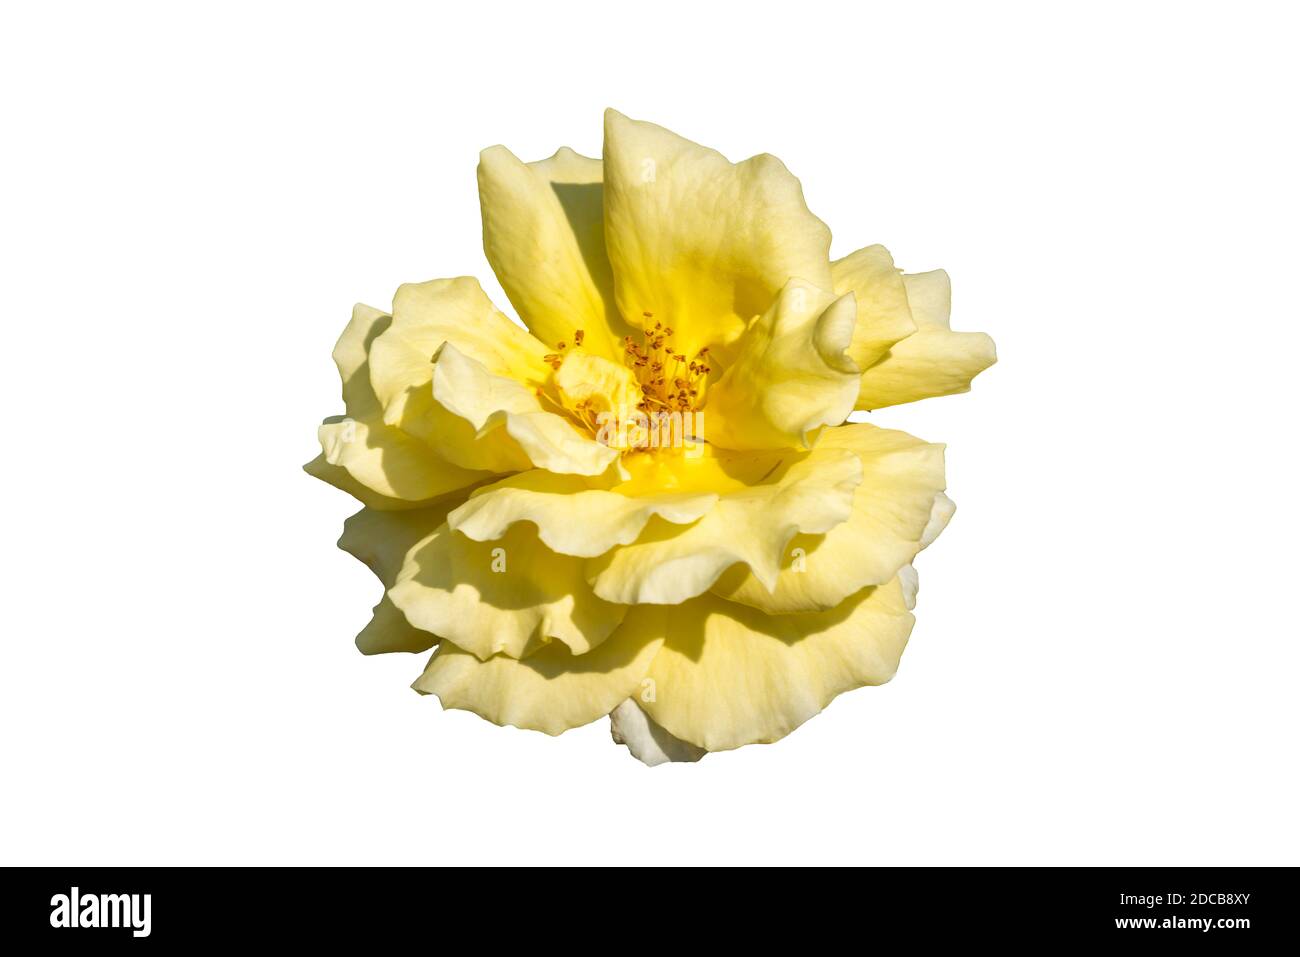 Rose 'Korlillub' (rosa) a yellow perennial spring summer autumn flower shrub plant also known as 'Lichtkonigin Lucia' cut out and isolated on a white Stock Photo